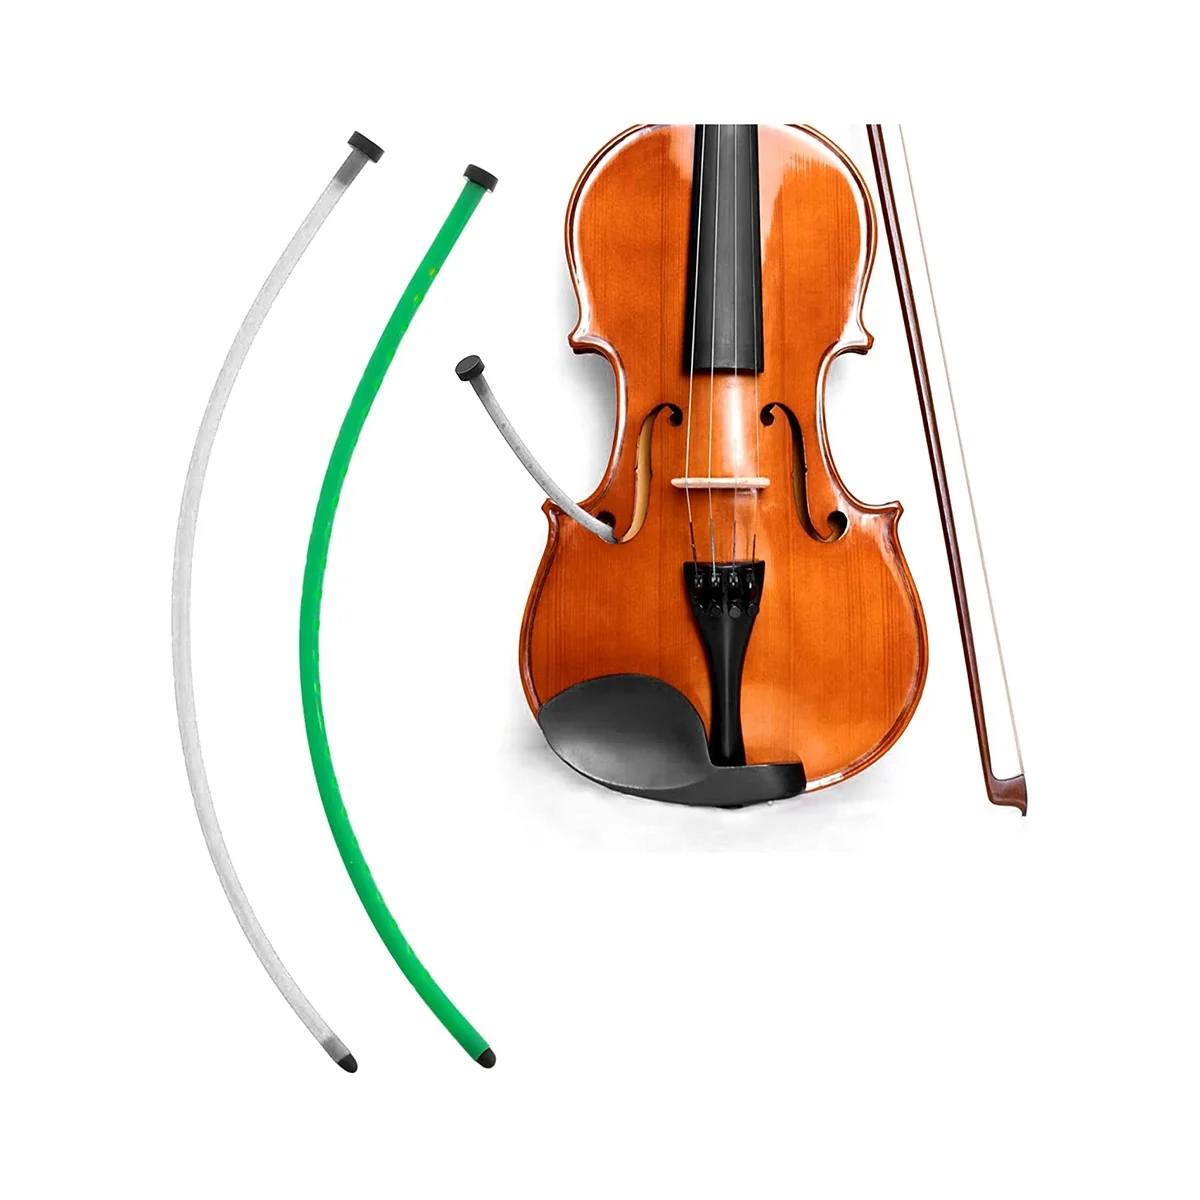 

2Pcs Violin Humidifier Violin Sound Hole Humidifier F Hole Humidifier To Prevent Cracking Fret Ends Top Sinking Dryness